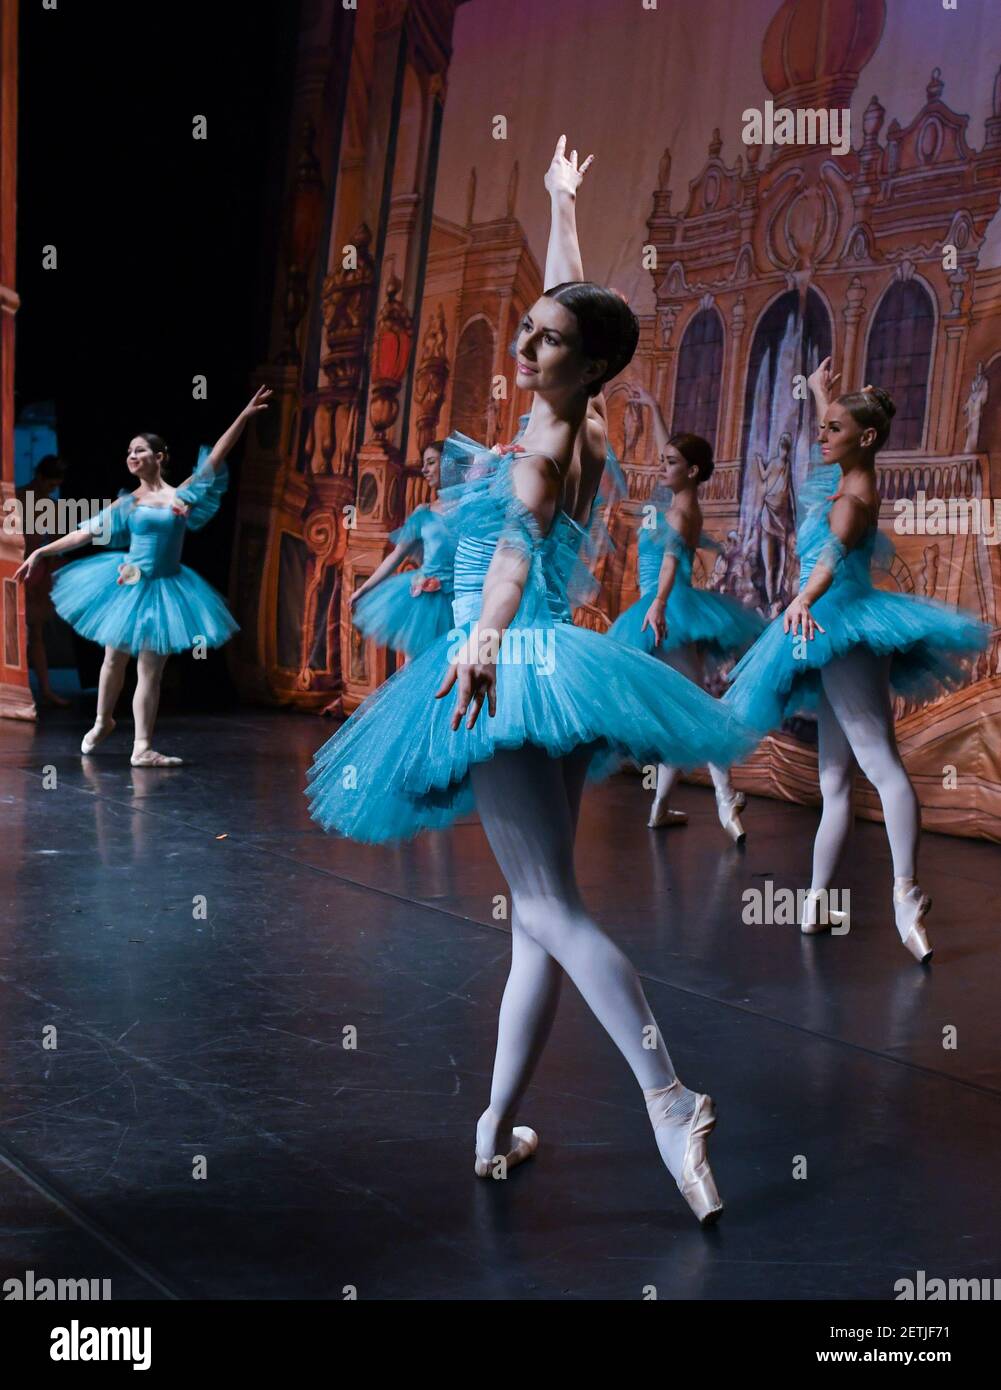 A scene from 'Sleeping Beauty' performed by The Royal Moscow Ballet during  their Irish Tour 2017, in The Helix, Dublin. On Saturday, March 11, 2017,  in Dublin, Ireland. Photo by Artur Widak ***